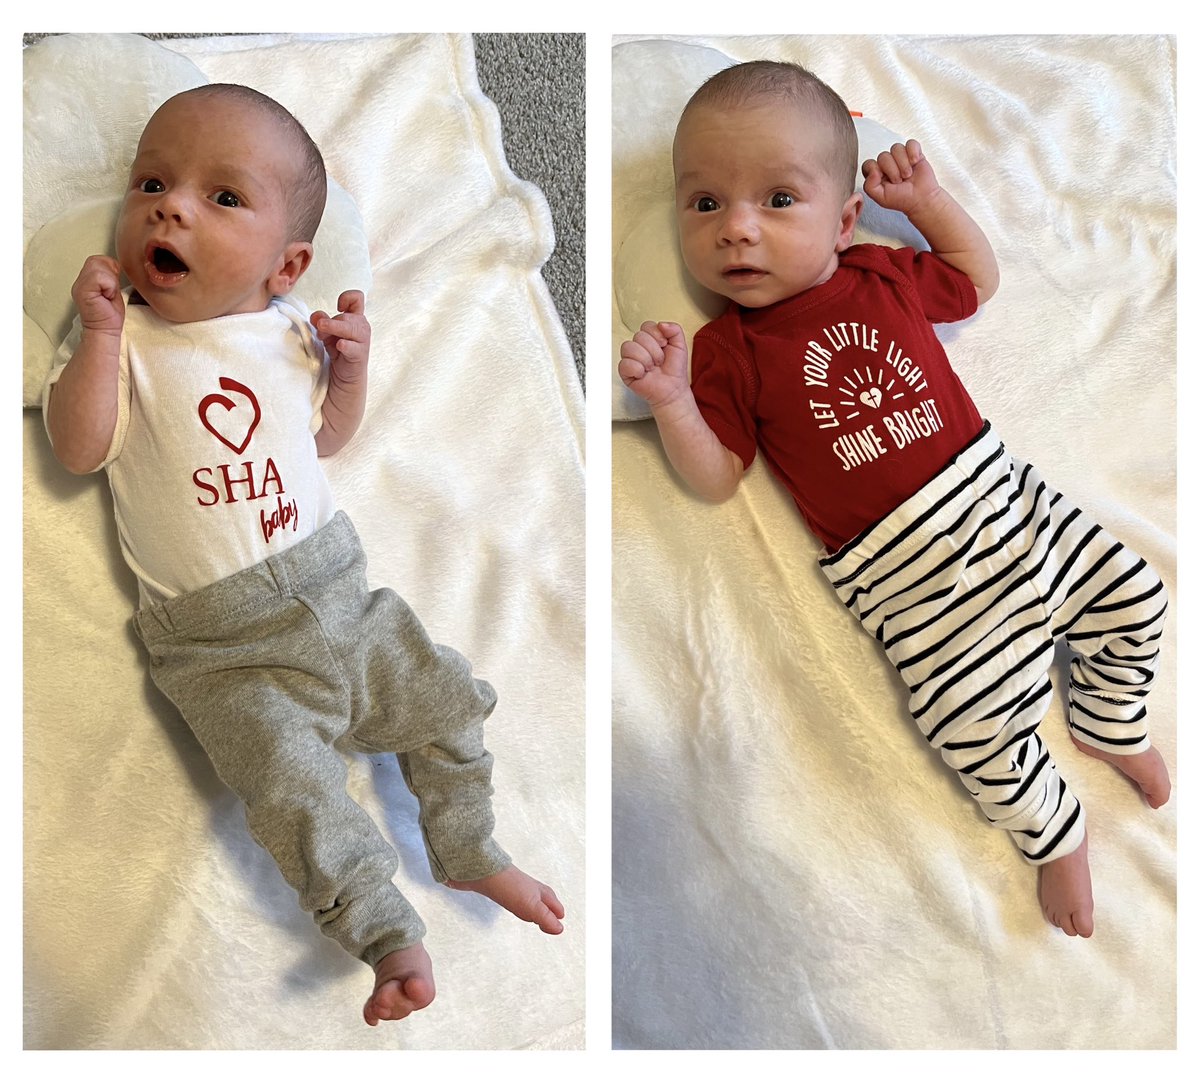 Hey @ascjus @CorJesuAcademy @SHAhamden - you’ve got an ASCJ superfan ready to join the class of 2040 (thanks to @GailTBellucci and @smgwct)! ❤️🔥✝️💒 #StartEmYoung